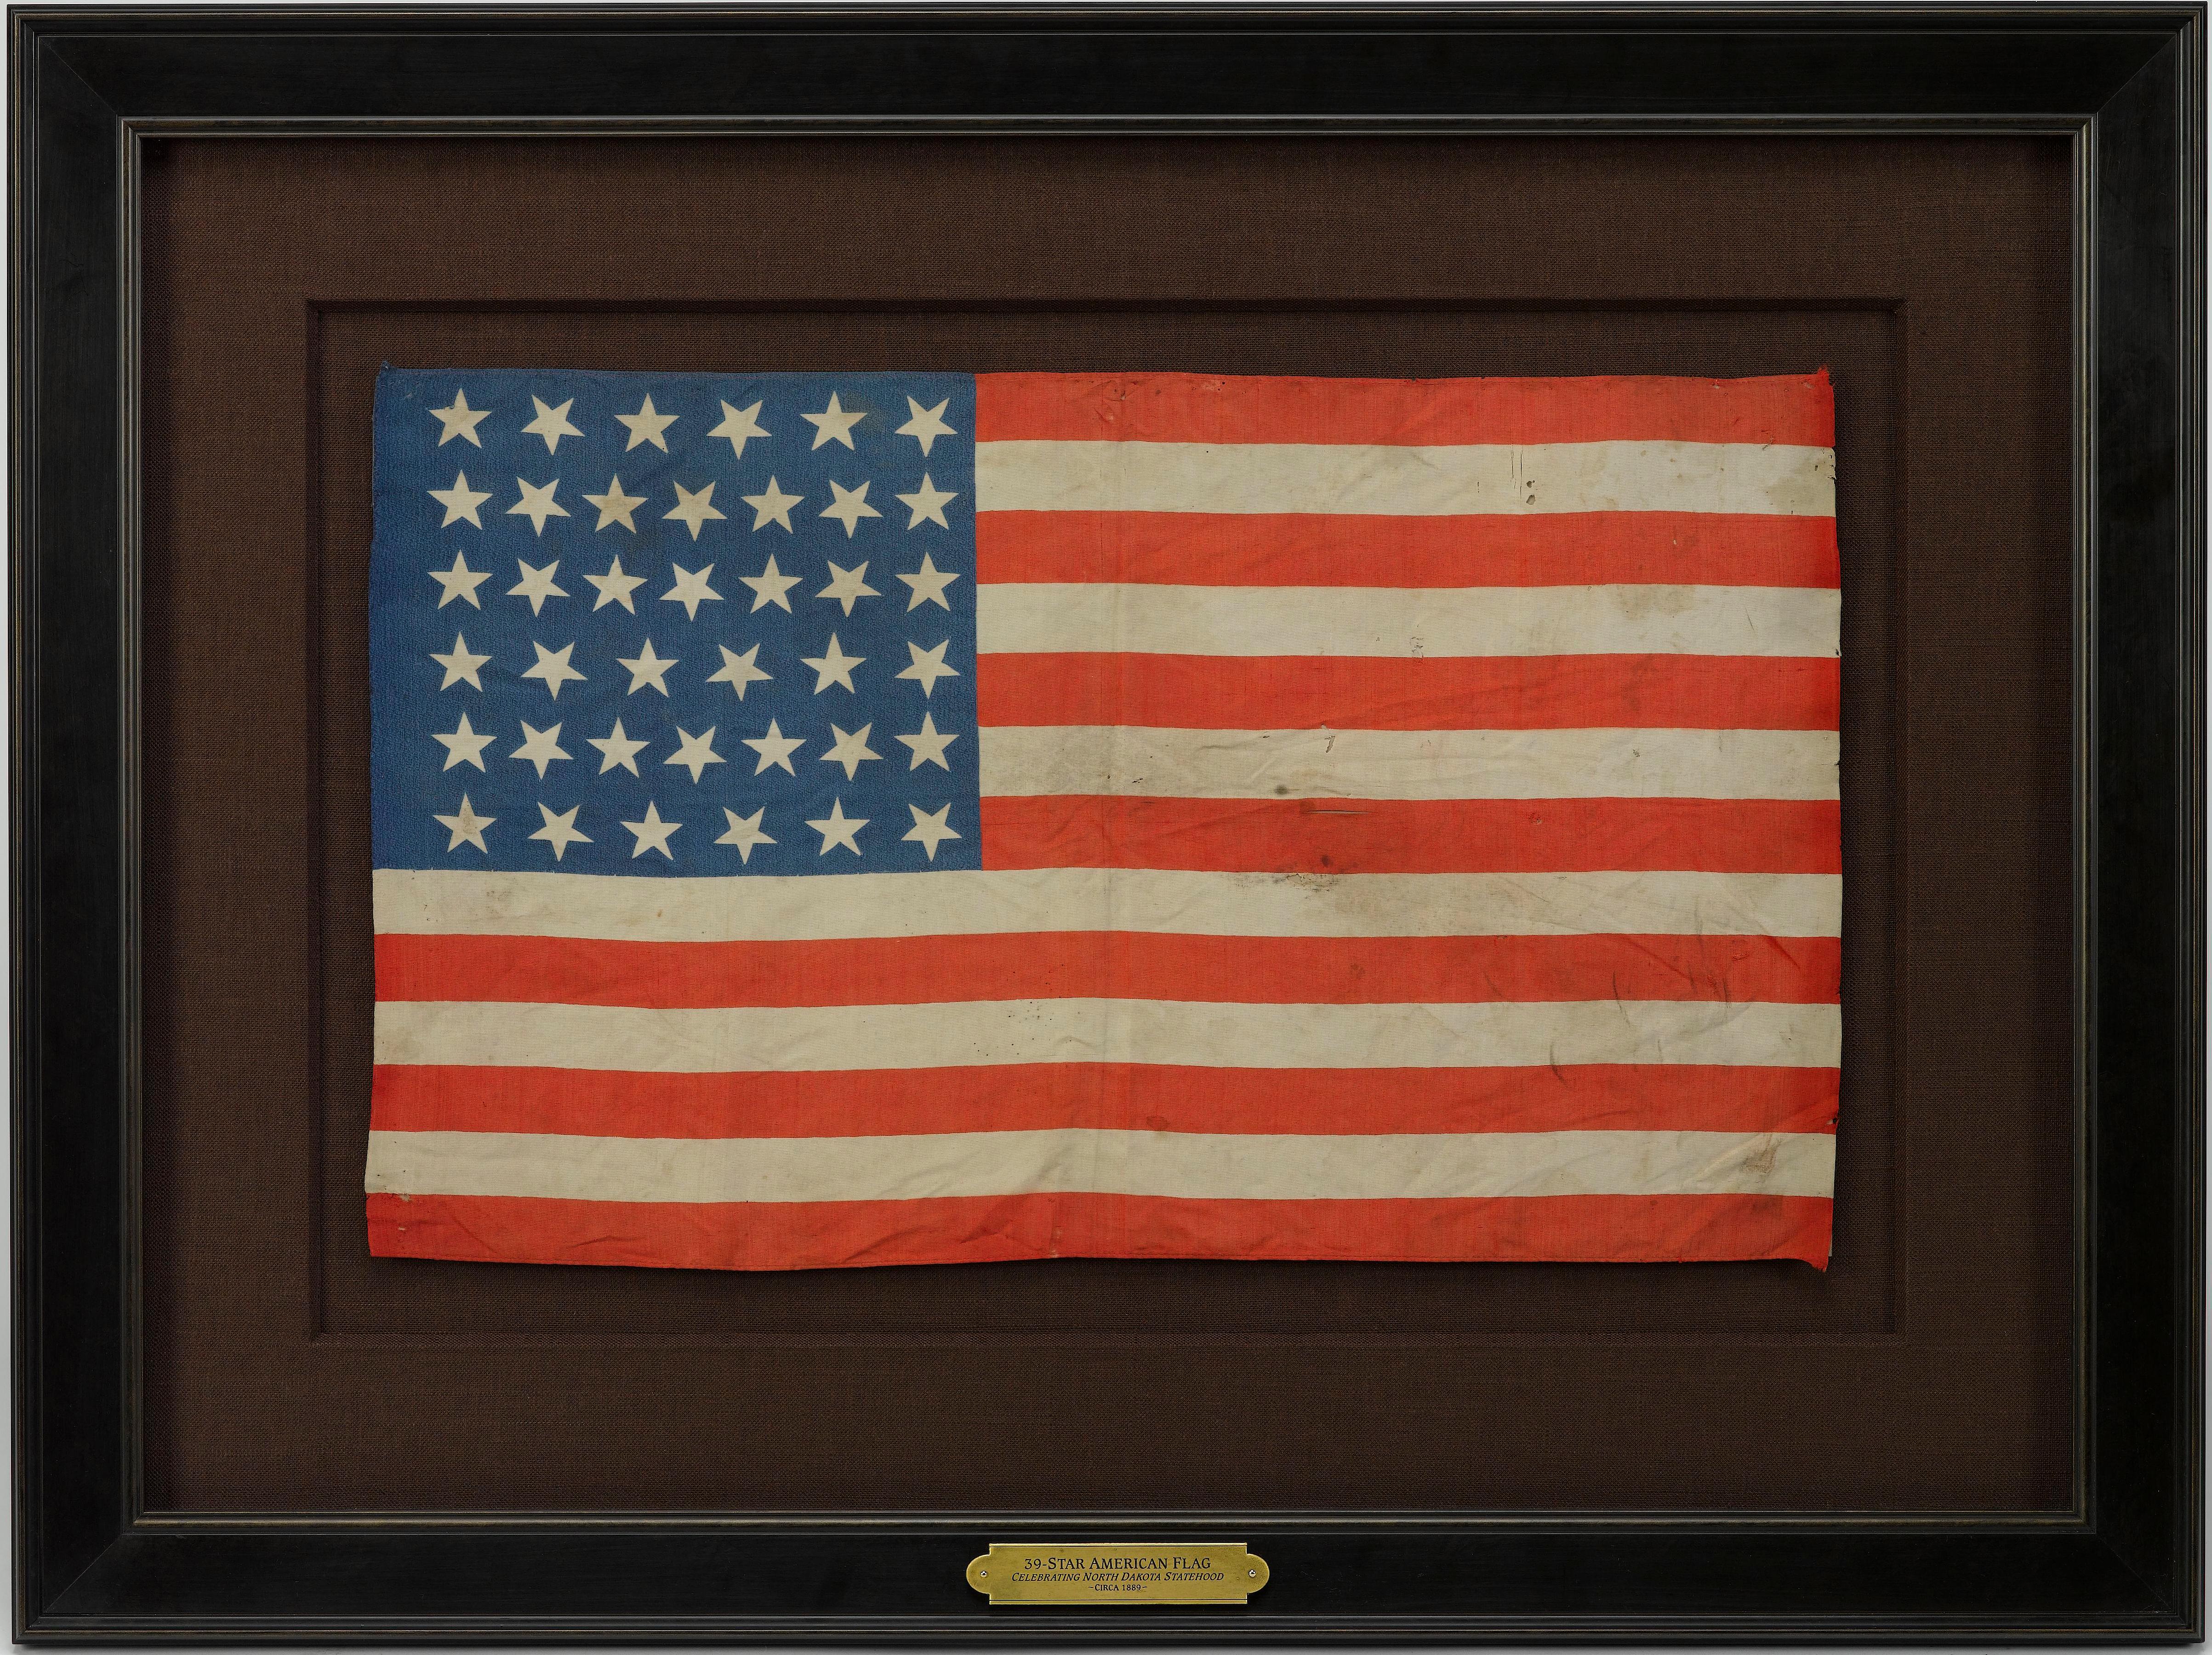 This is a 39-star unofficial American flag, printed on silk. The flag dates between 1877 and 1889, showcasing a whimsical star pattern in the canton. The flag's canton boasts a 6/7/7/6/7/6 row pattern of white stars printed on a dark blue ground.